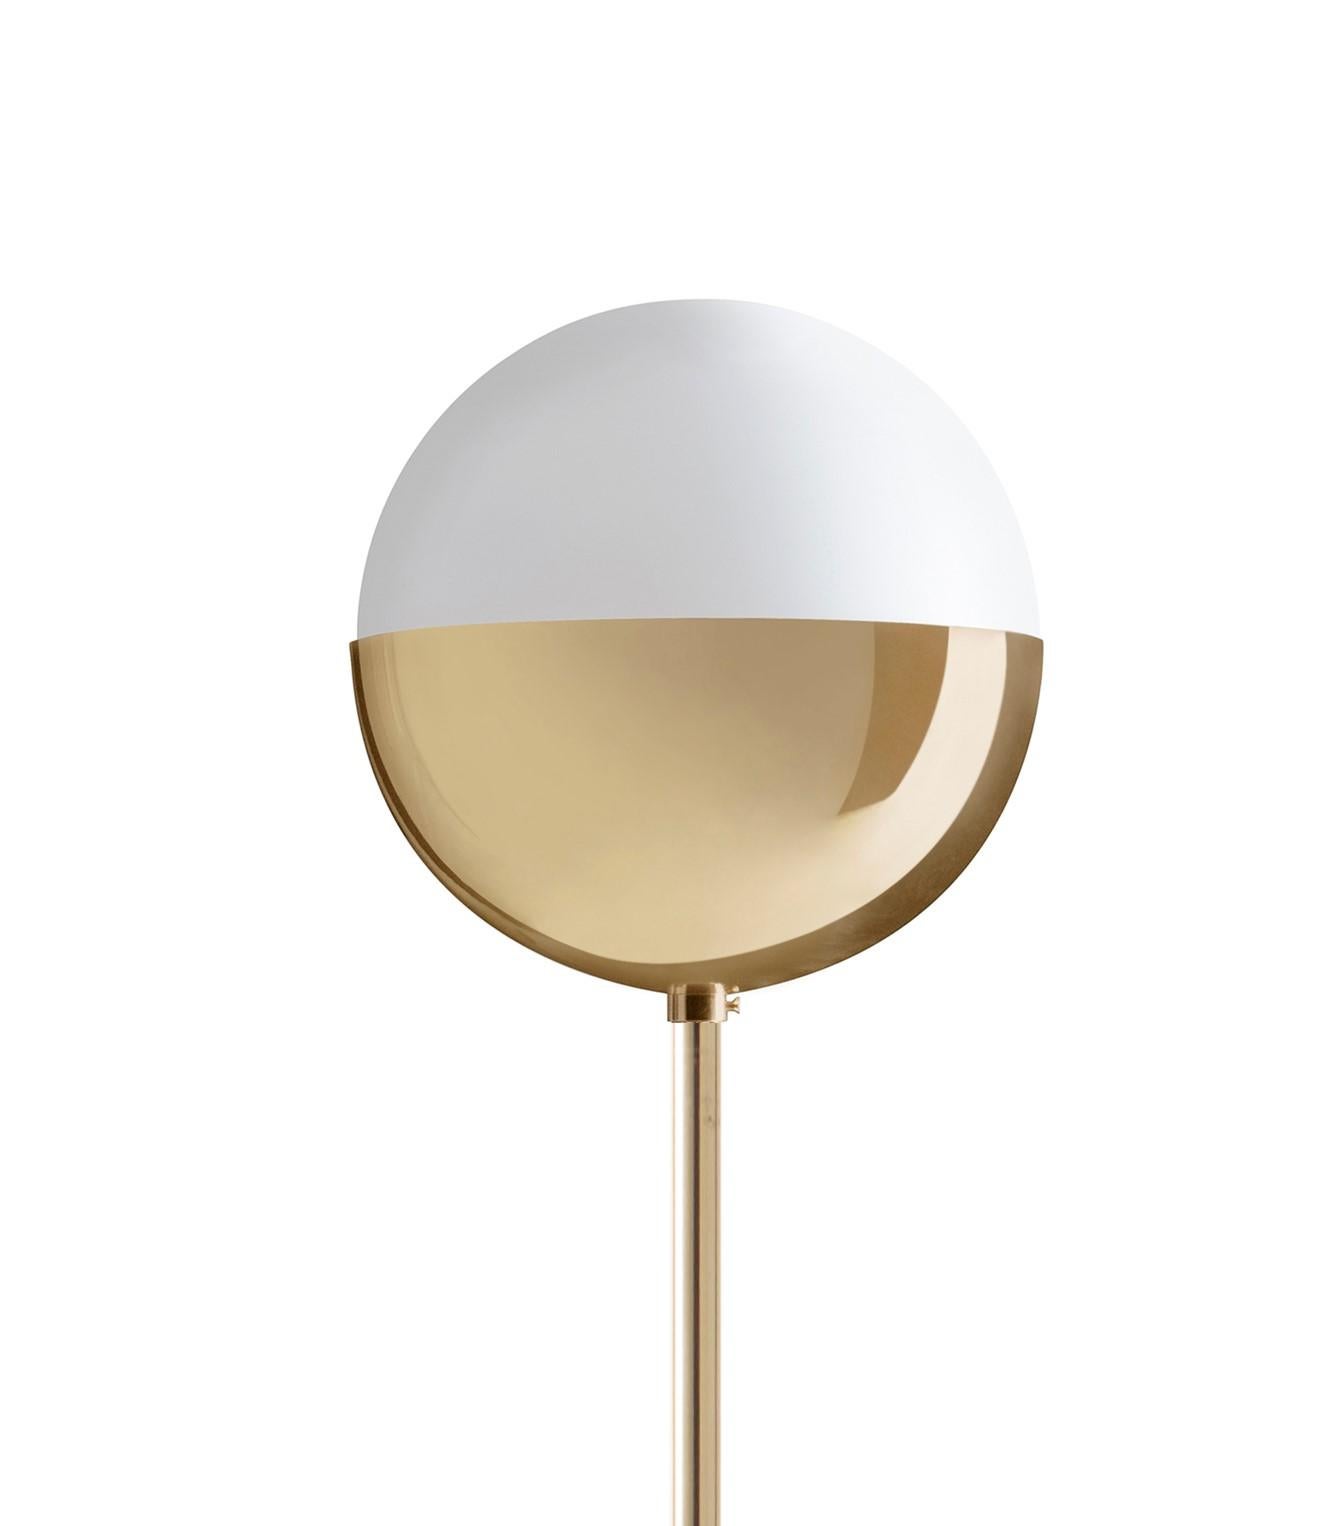 Brass floor lamp 01 dimmable 150 by Magic Circus Editions
Dimensions: D 25 x H 150 cm
Materials: Brass base, smooth brass tube, glossy mouth blown glass
Non-Dimmable version available. 


Rethinking, reimagining, redesigning familiar objects